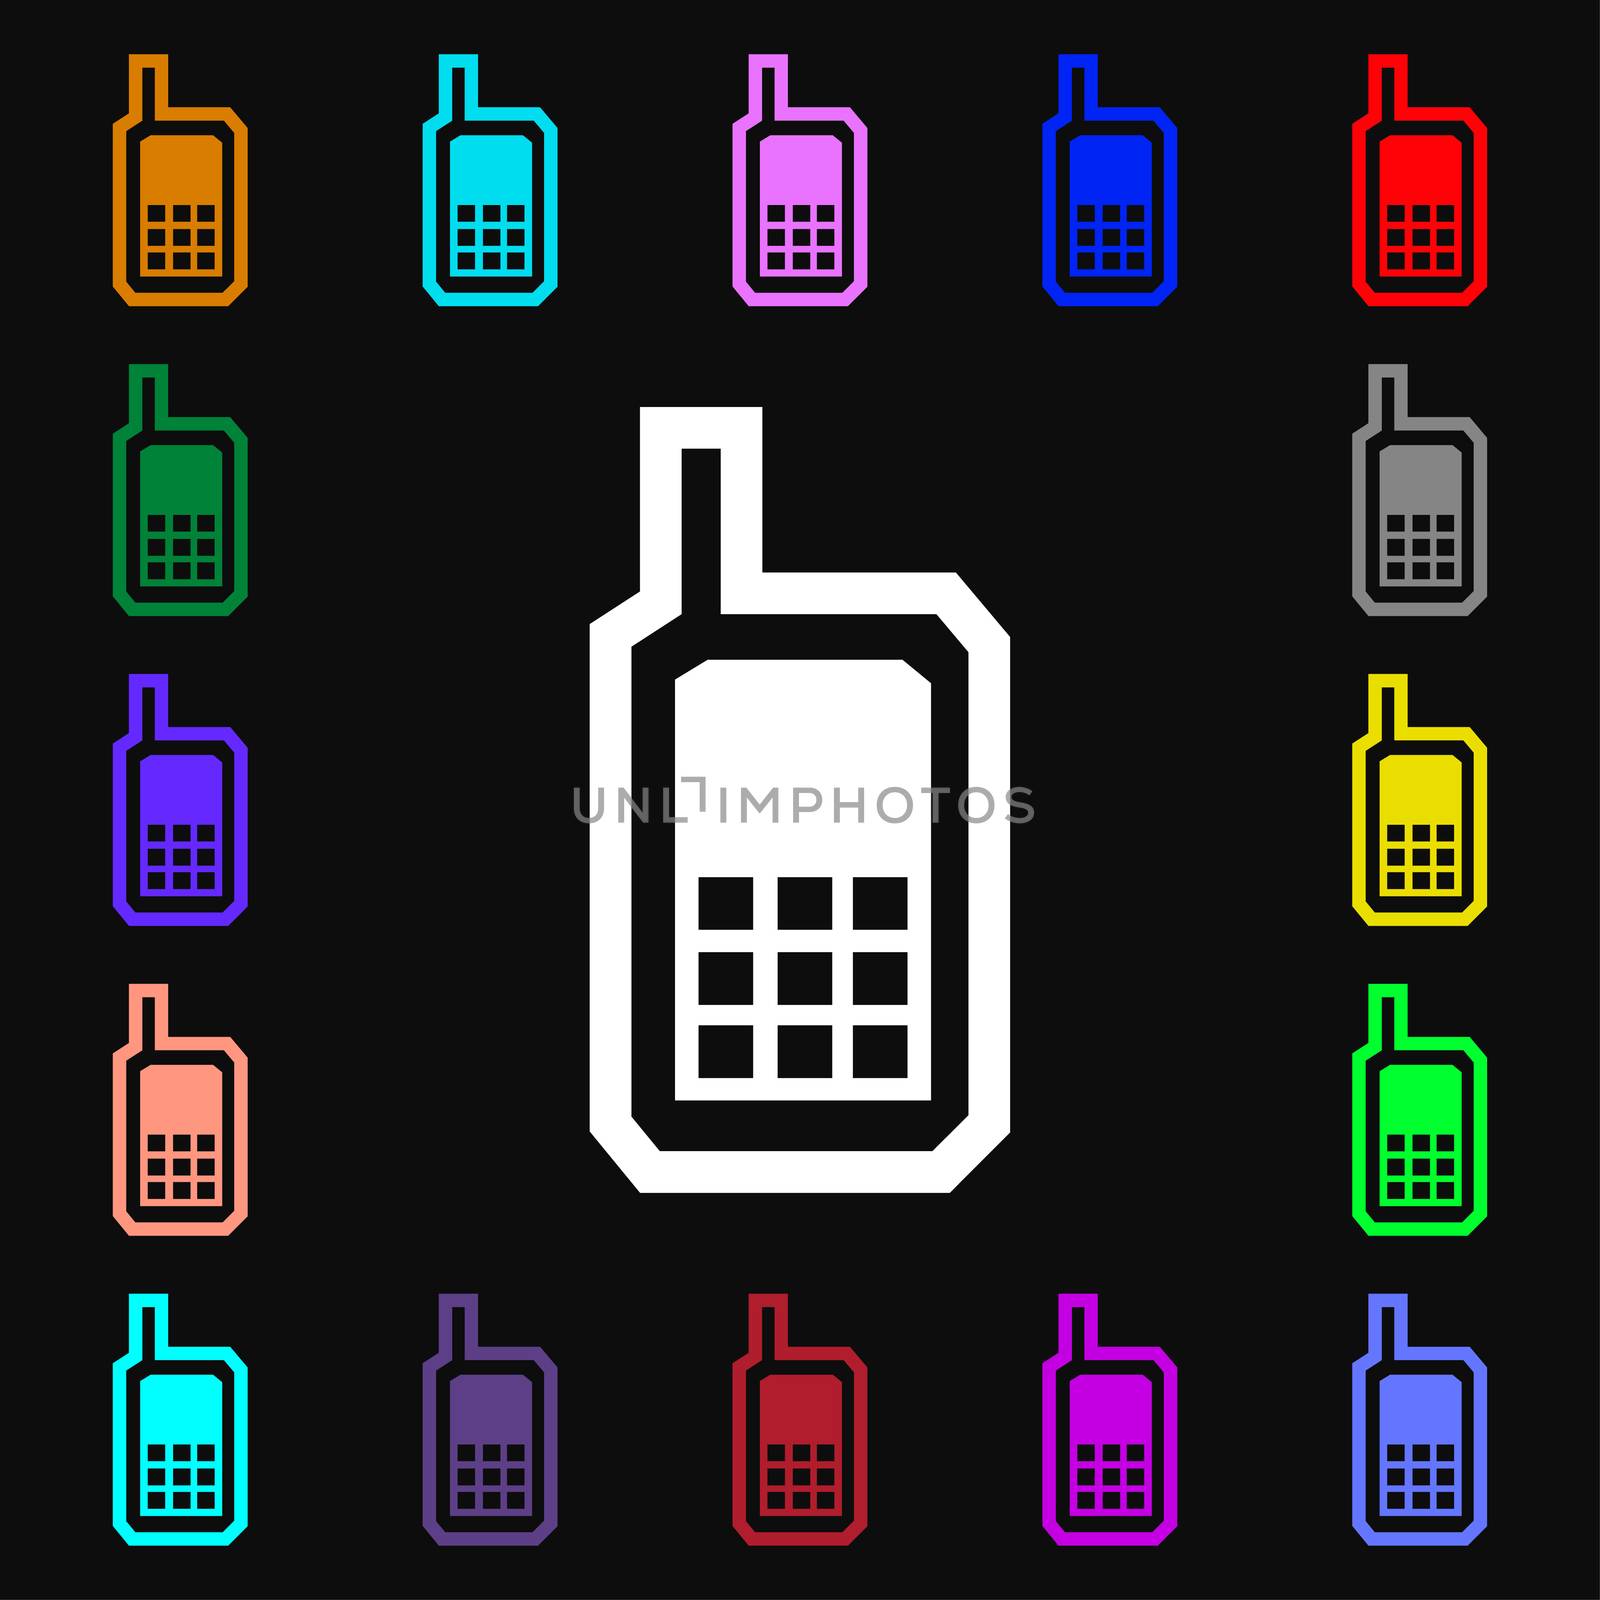 Mobile phone icon sign. Lots of colorful symbols for your design. illustration